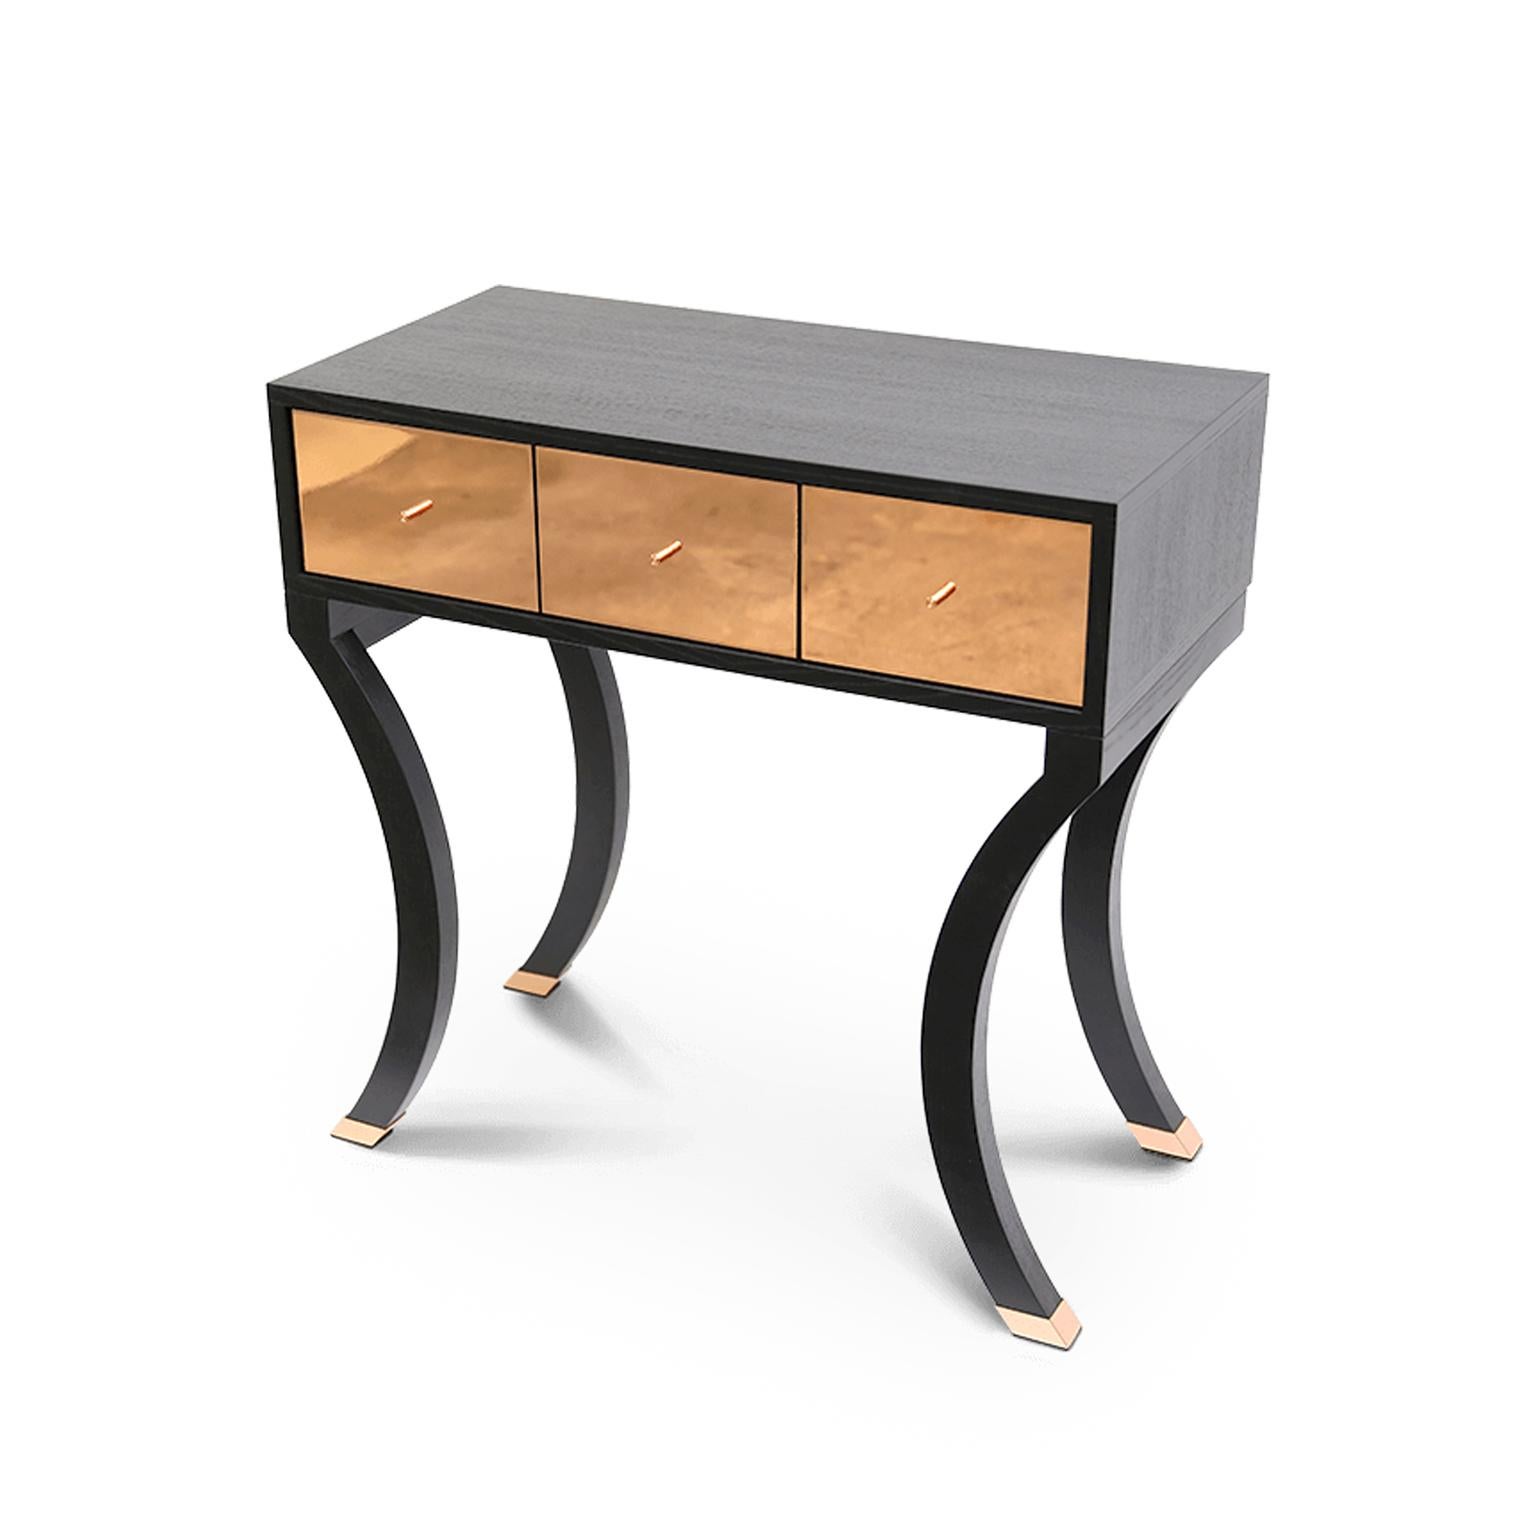 Available in a curated selection of fashionable finishes, this elegant console table is crafted of solid wood, supported by elegant legs. A sleek design complemented with 3 red velvet lined drawers with eye-catching copper pulls offer convenient